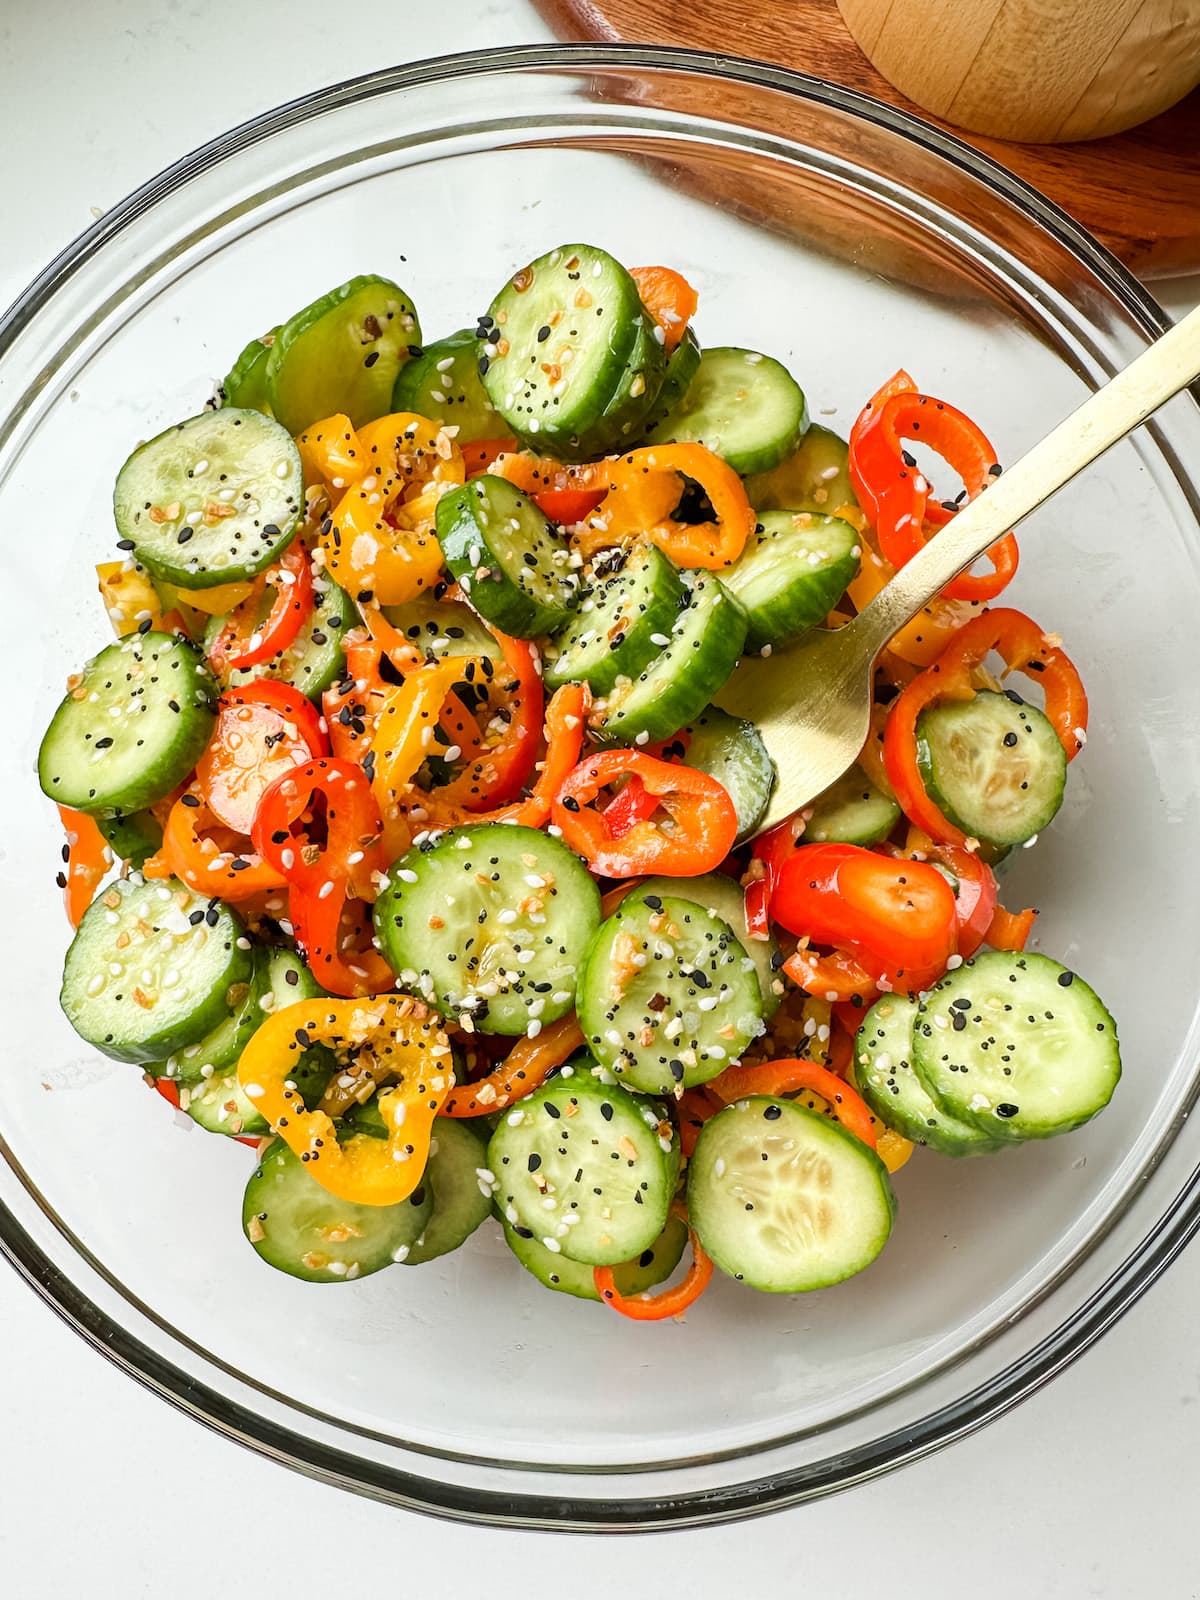 Cucumber and bell pepper salad in a clear mixing bowl.